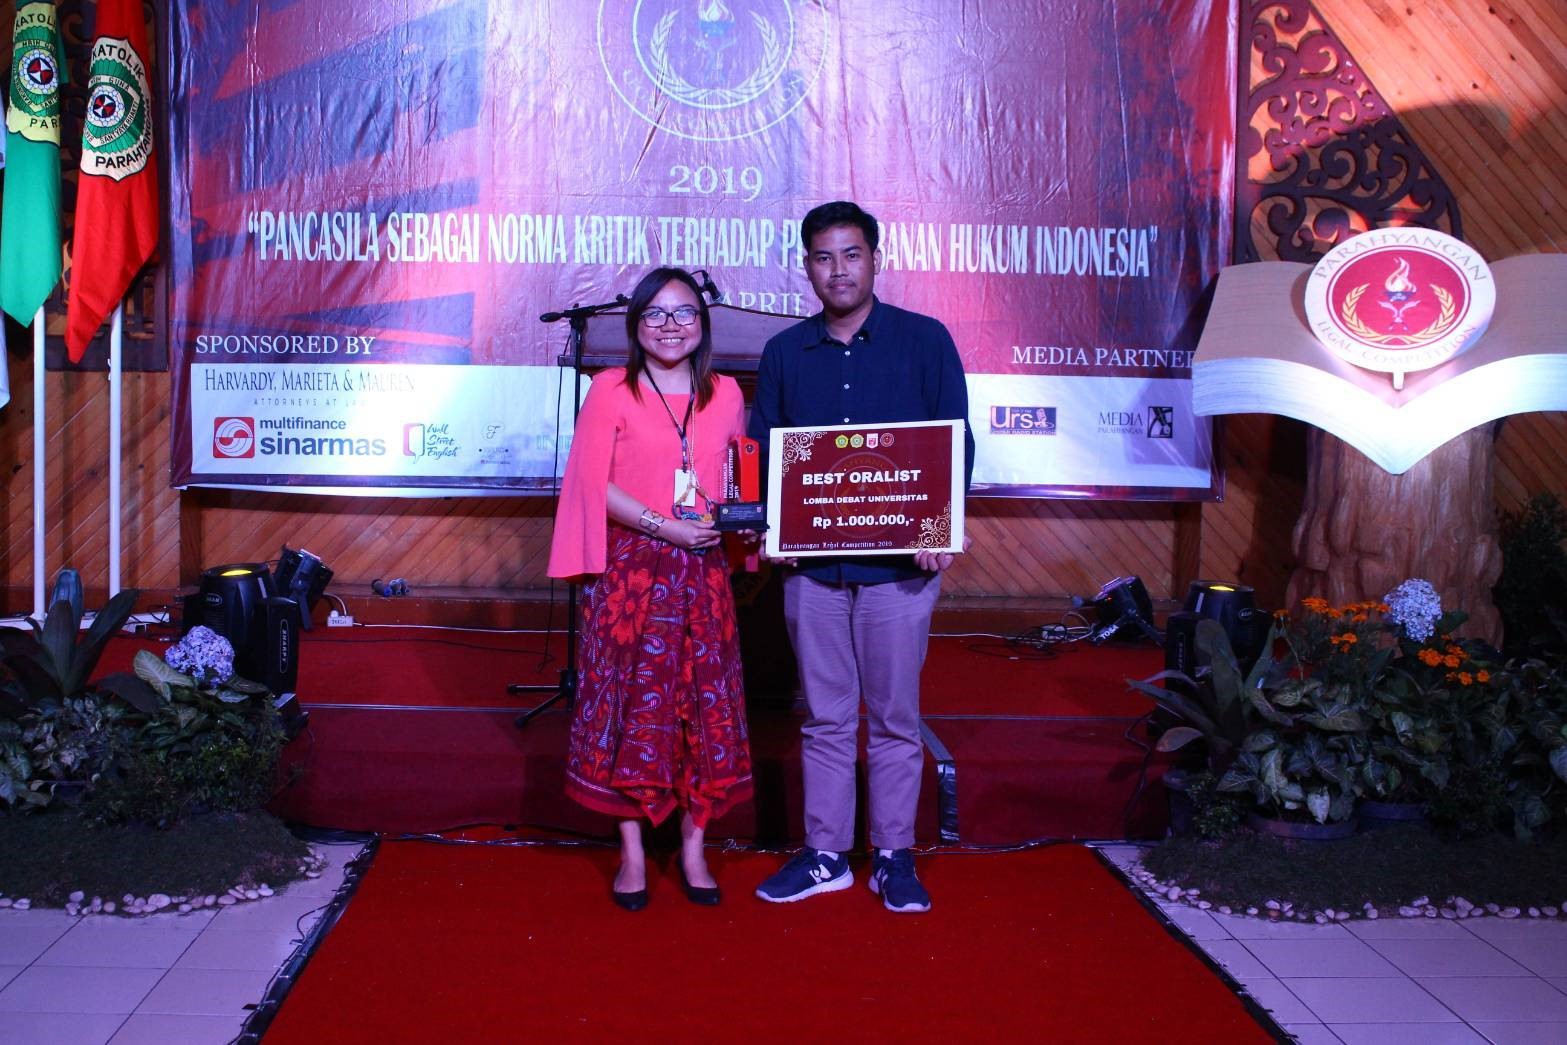 Alip Pamungkas wins best oralist award in a debate competition, Parahyangan Legal Competition 2019 held on Thursday, April 26, in Bandung.